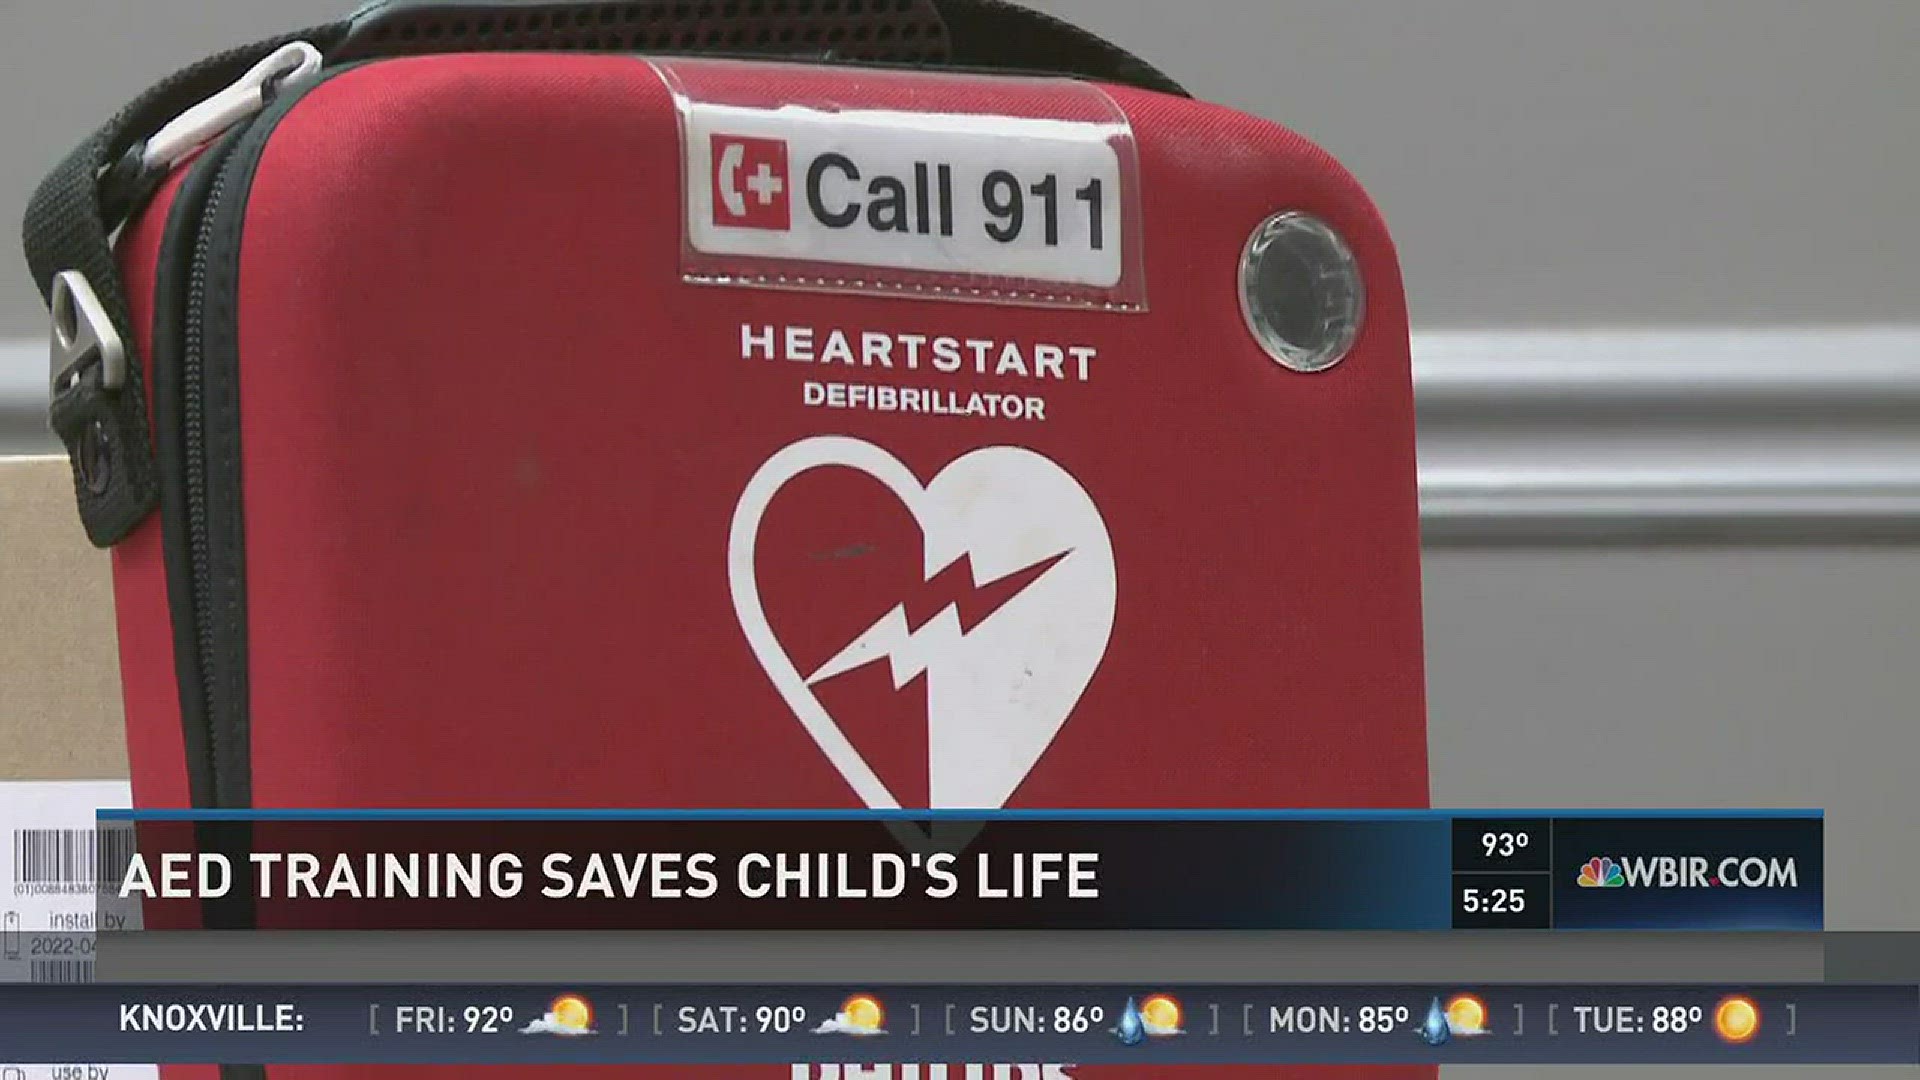 Sept. 15, 2016: Teachers at Holston Middle School used their training and an AED to save a child's life when he went into cardiac arrest during school.